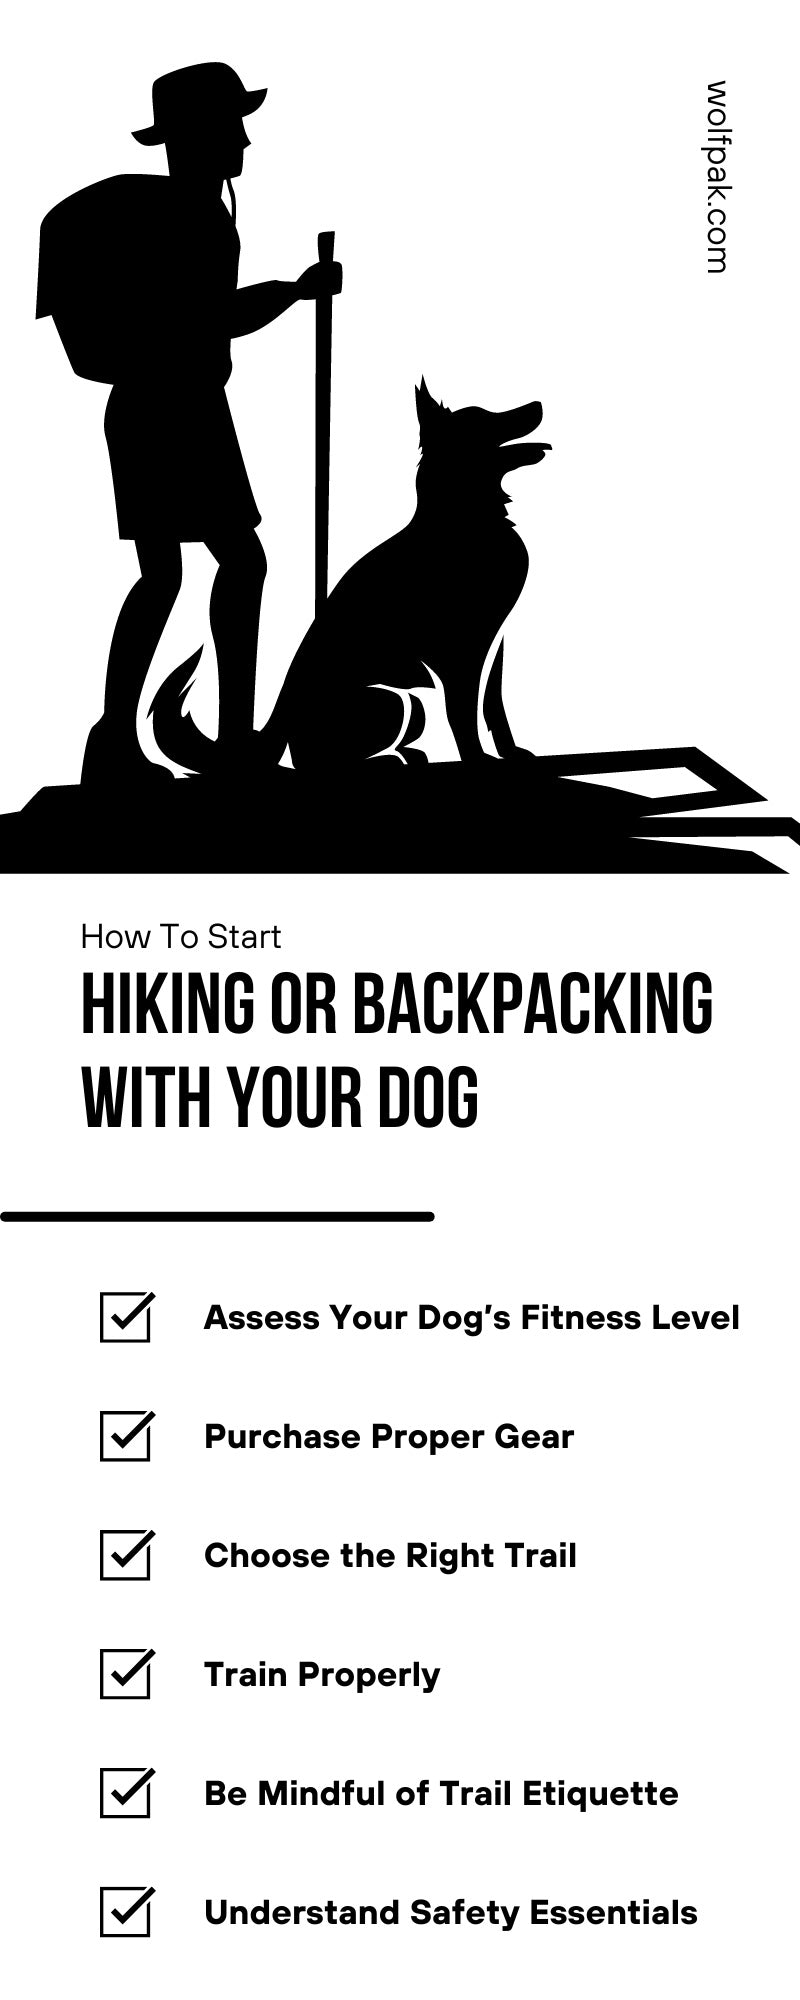 How To Start Hiking or Backpacking With Your Dog